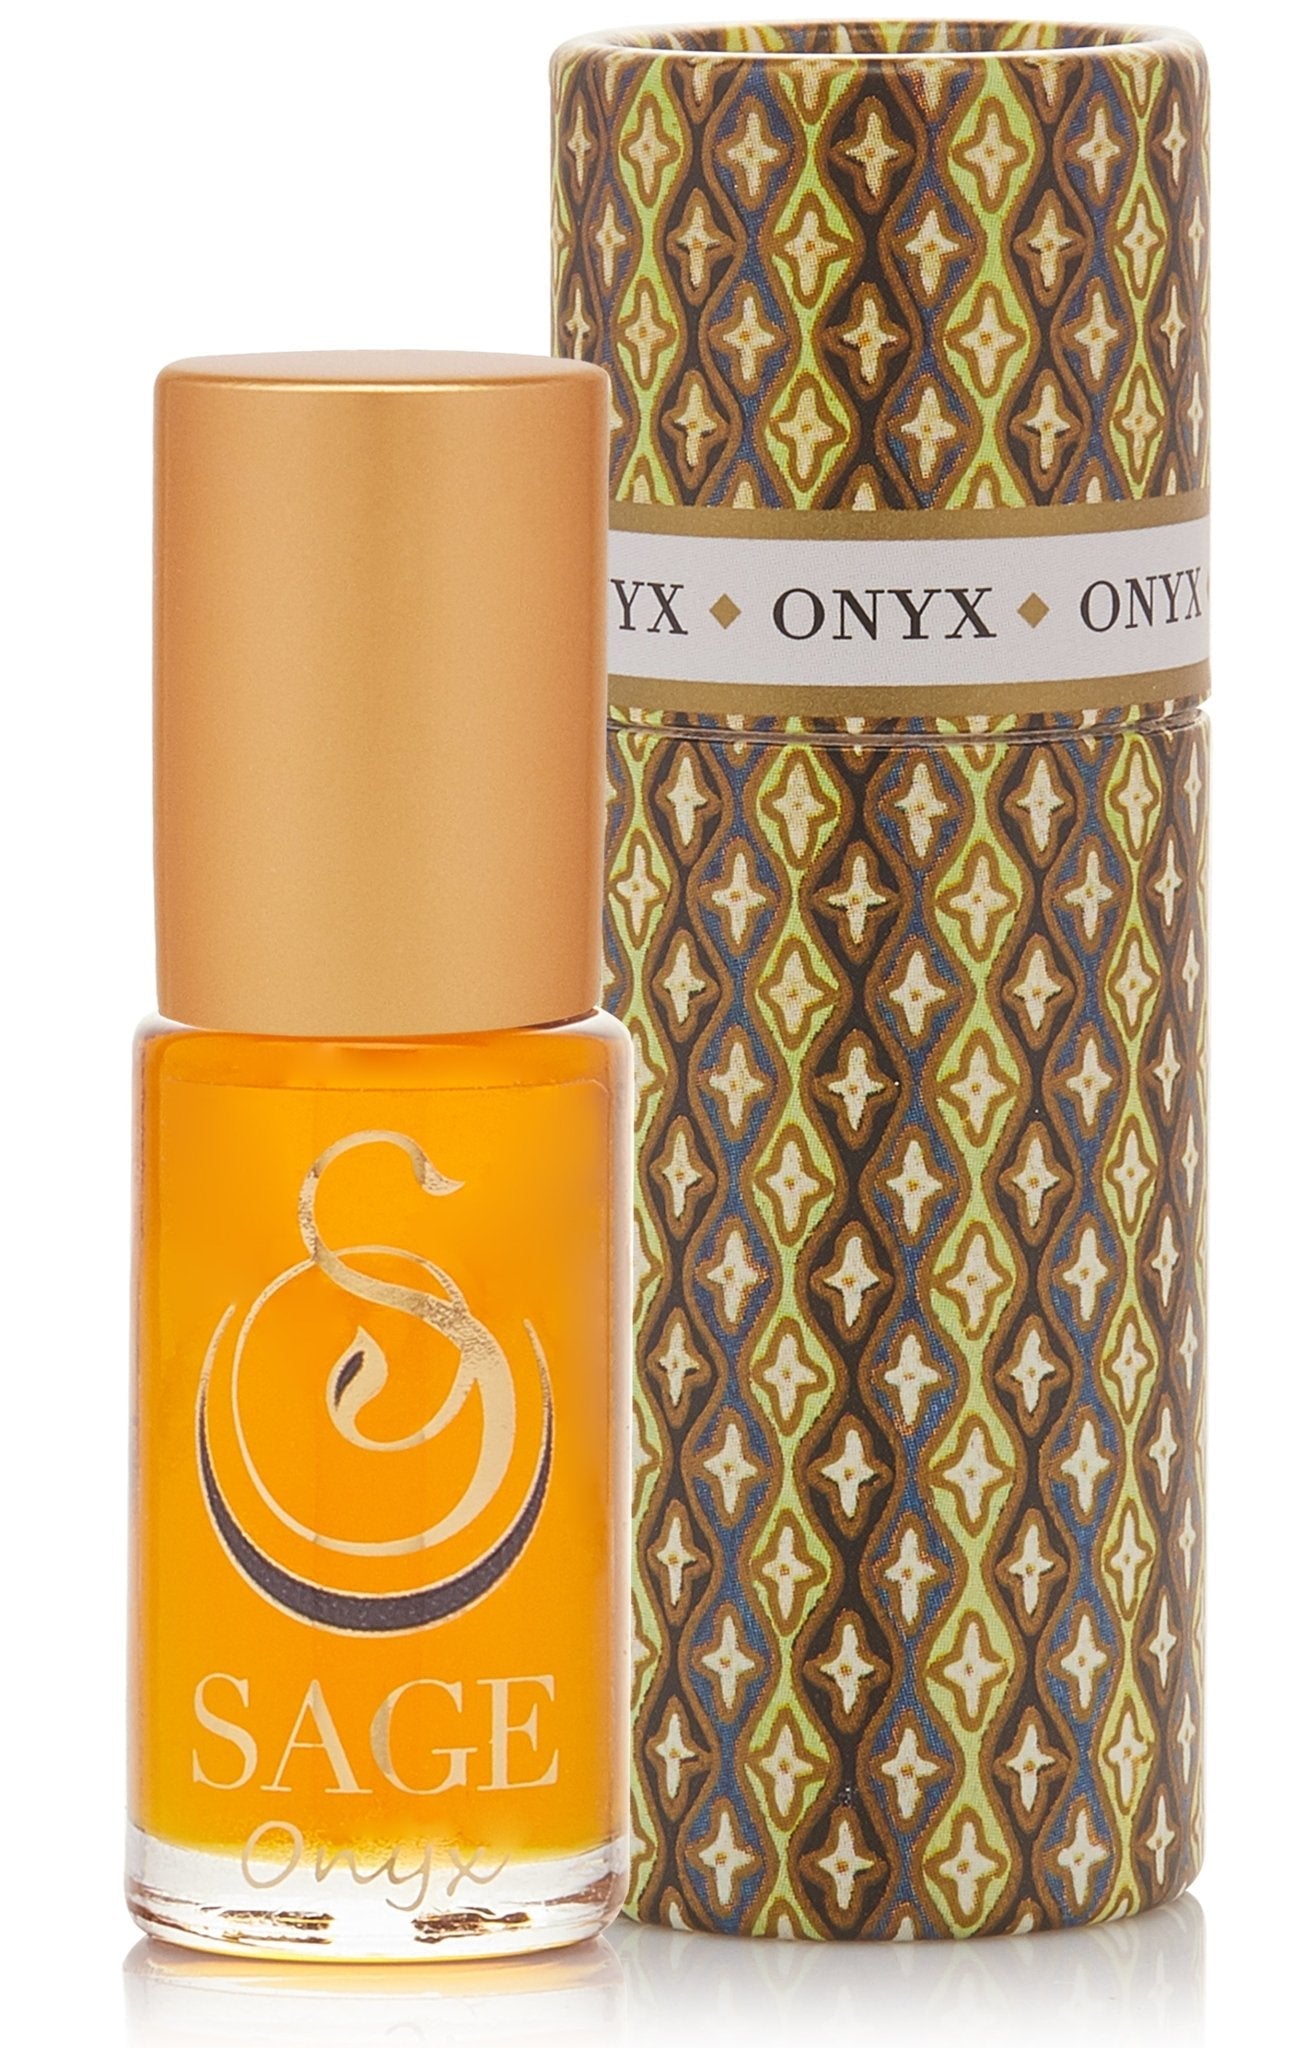 OBSESSION ~ Onyx Gemstone Perfume Roll-On and EDT Gift Set by Sage - The Sage Lifestyle